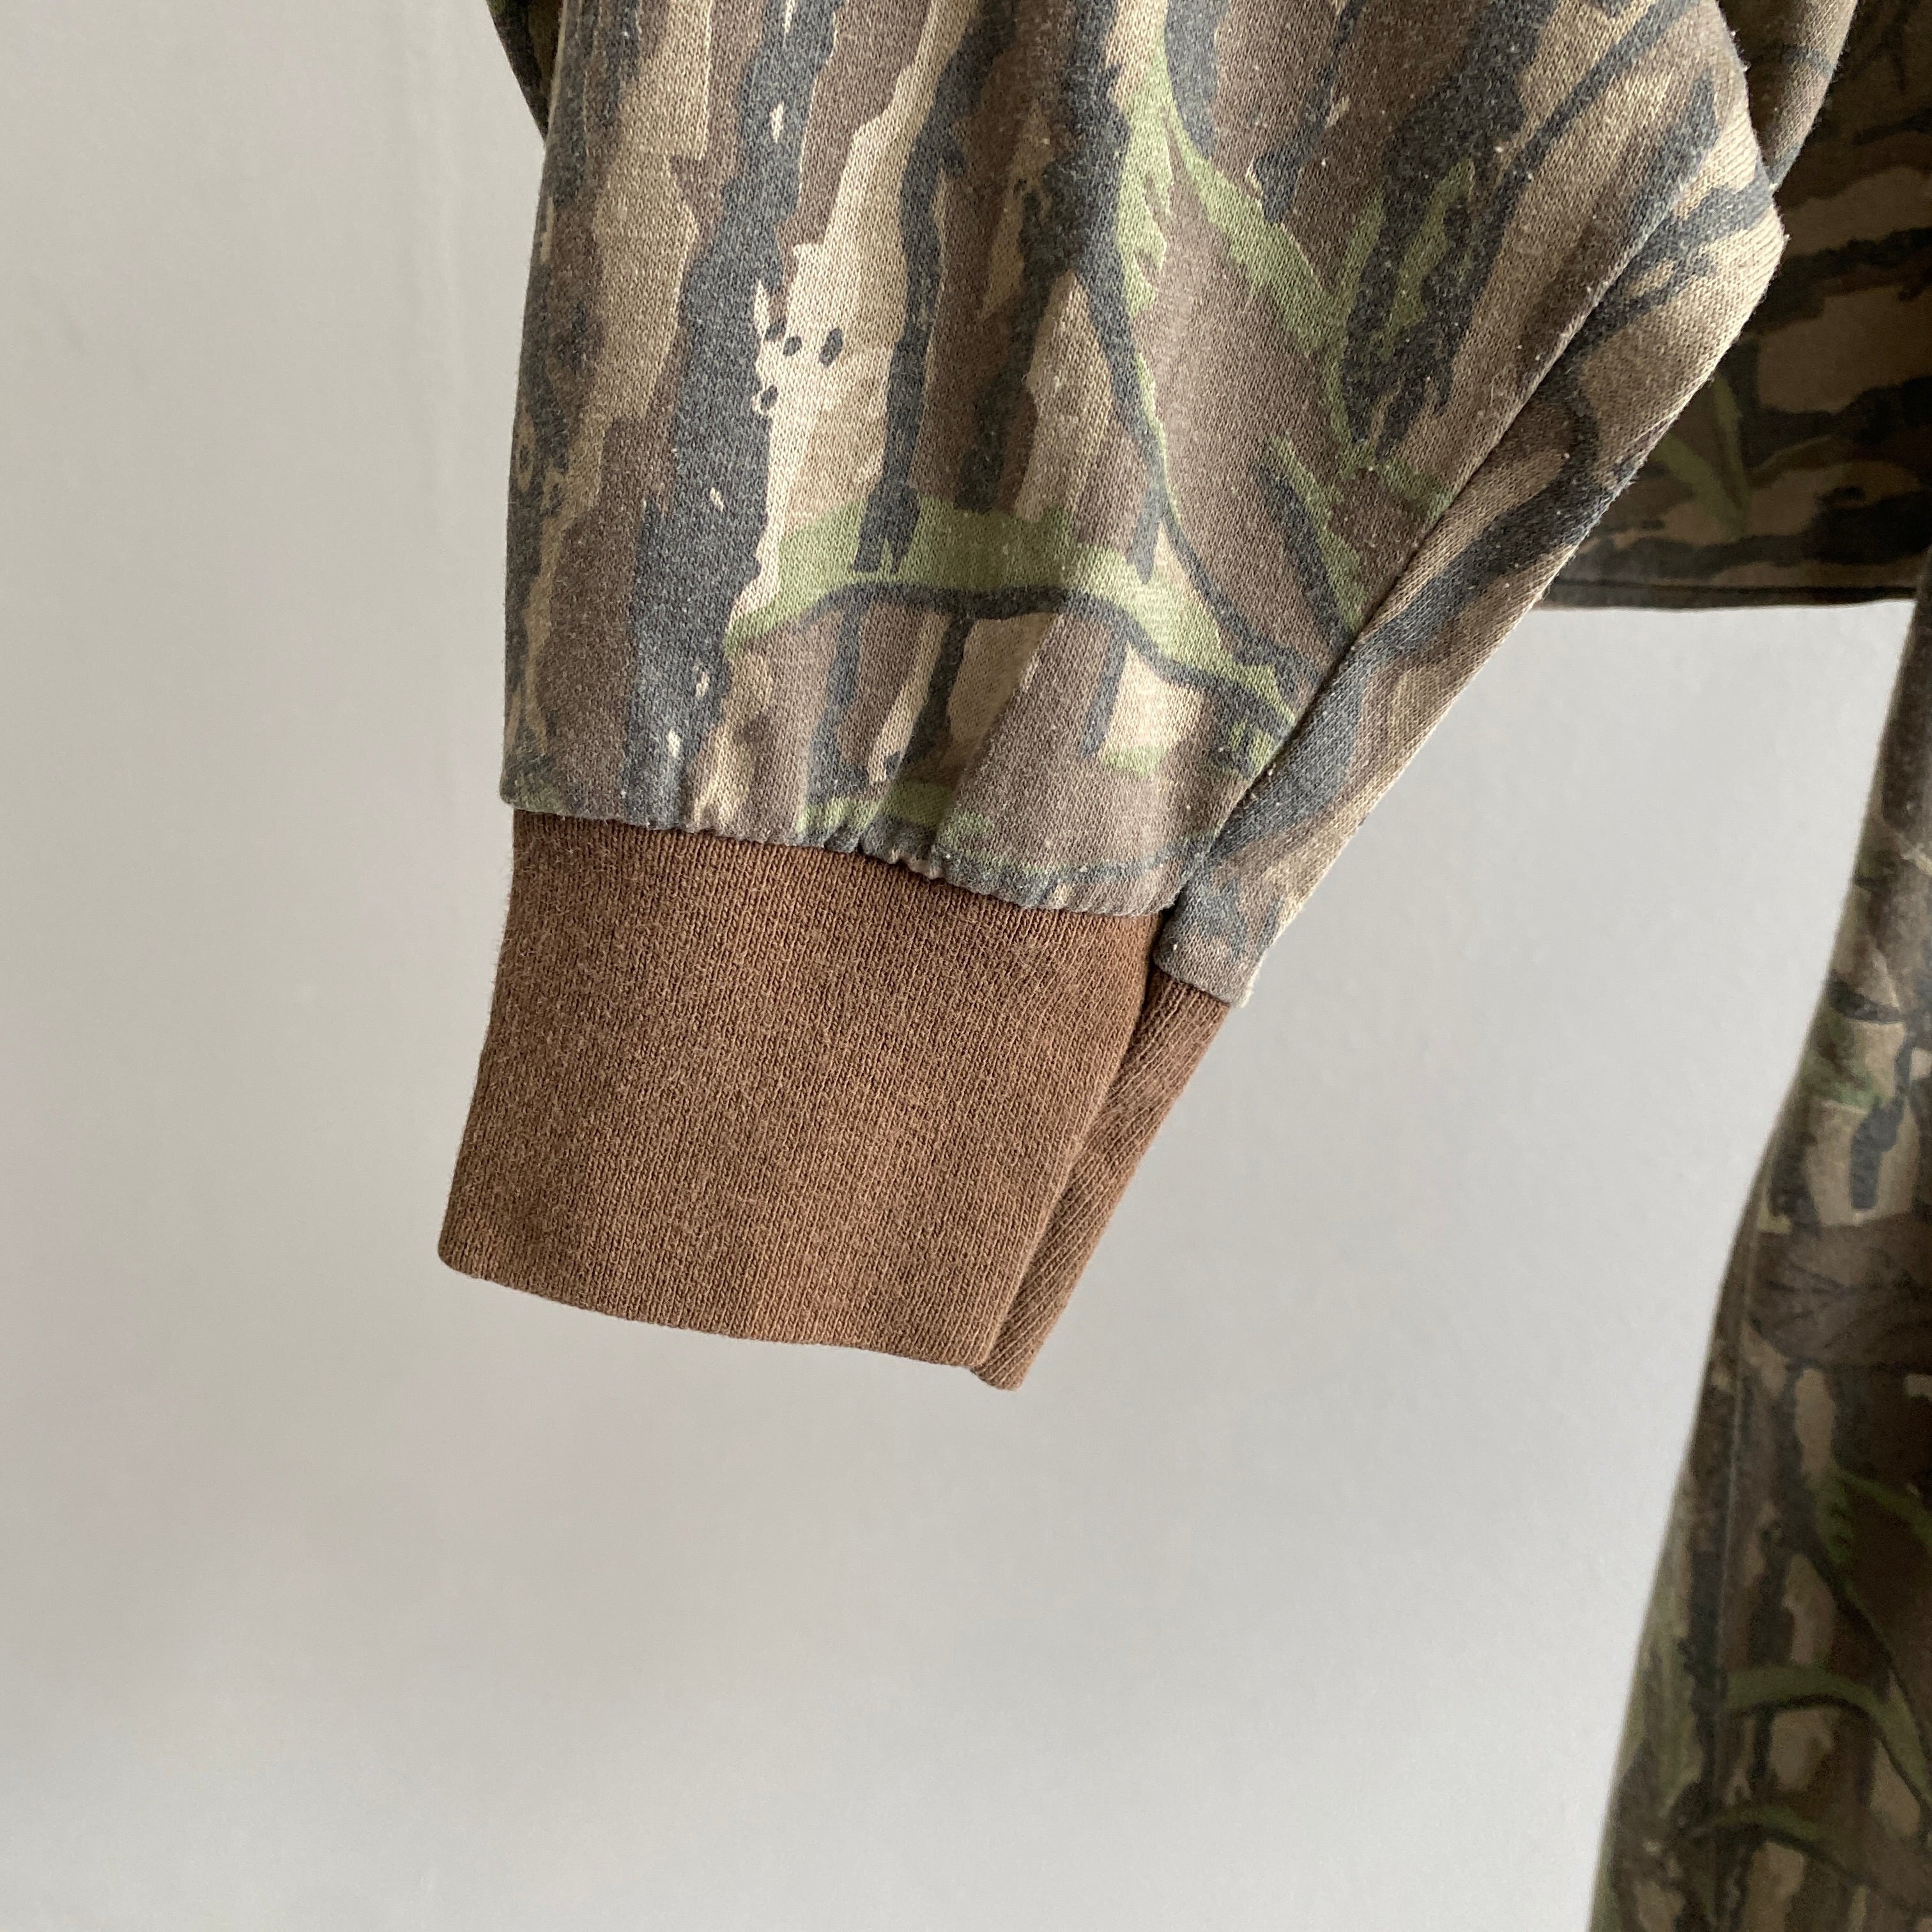 1990s Real Trees Long Sleeve Hunting Camo with Brown Collar